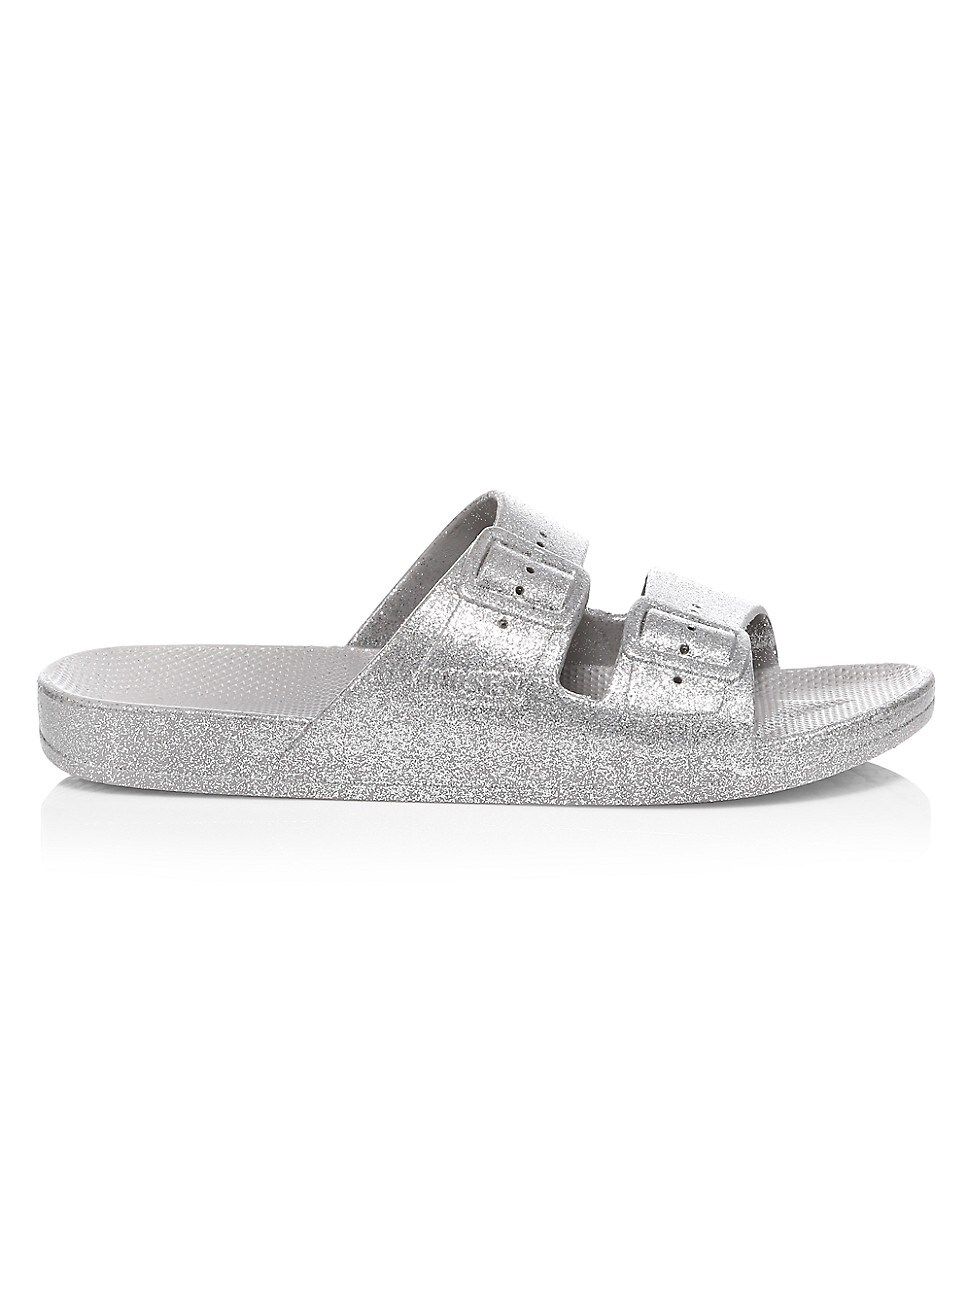 Freedom Moses Glitter Two-Strap Slides | Saks Fifth Avenue